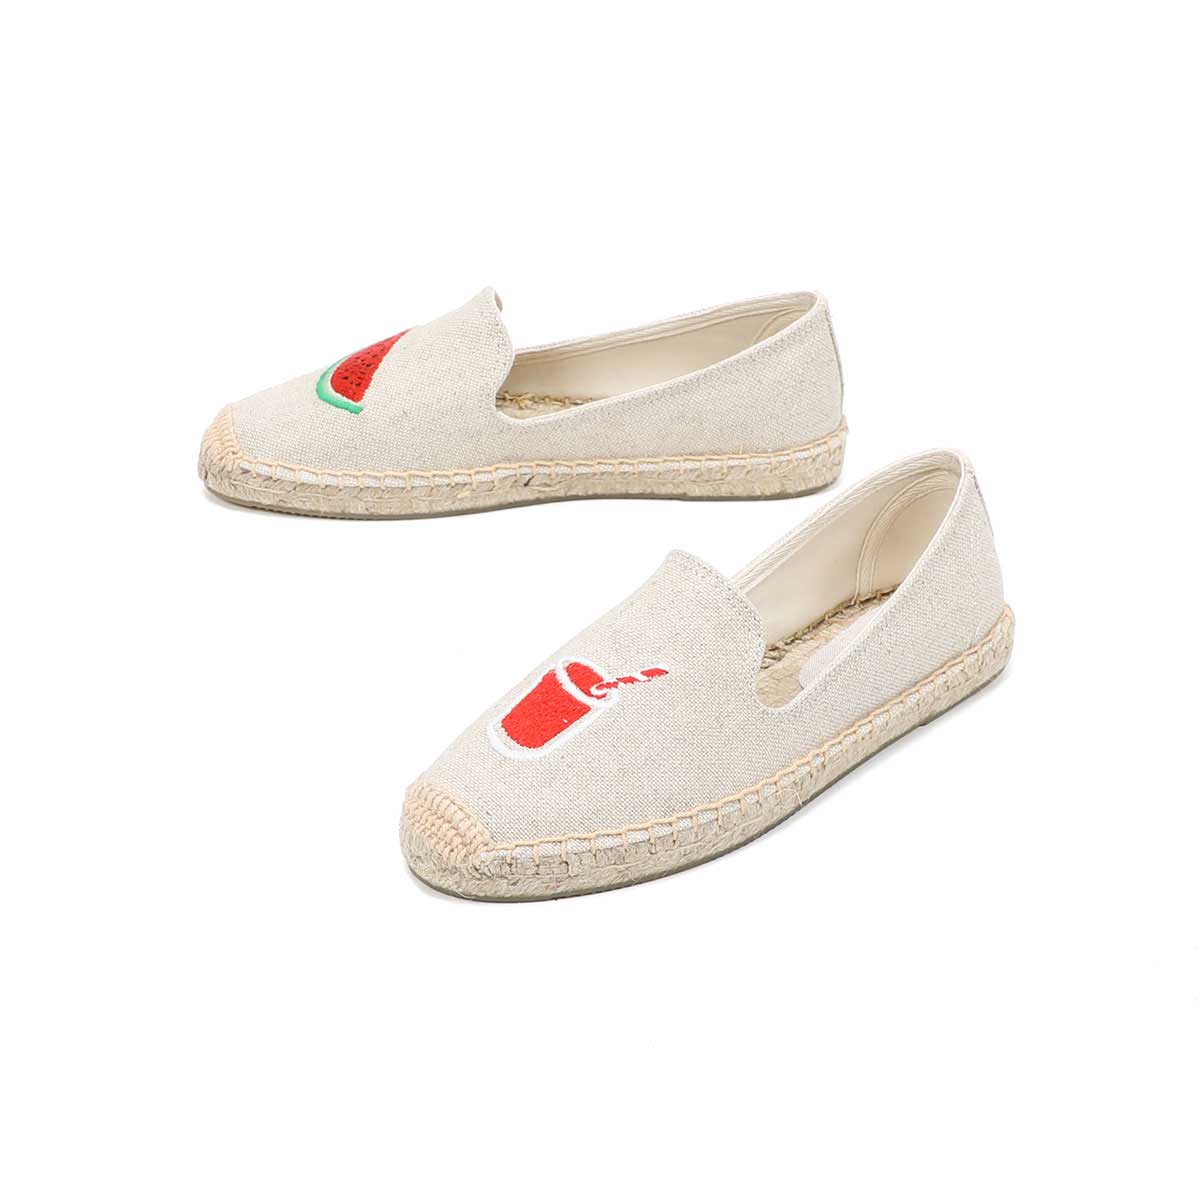 2022 new fruit pattern embroidery flat loafers shallow mouth round toe comfortable espadrilles ladies slip-on casual shoes